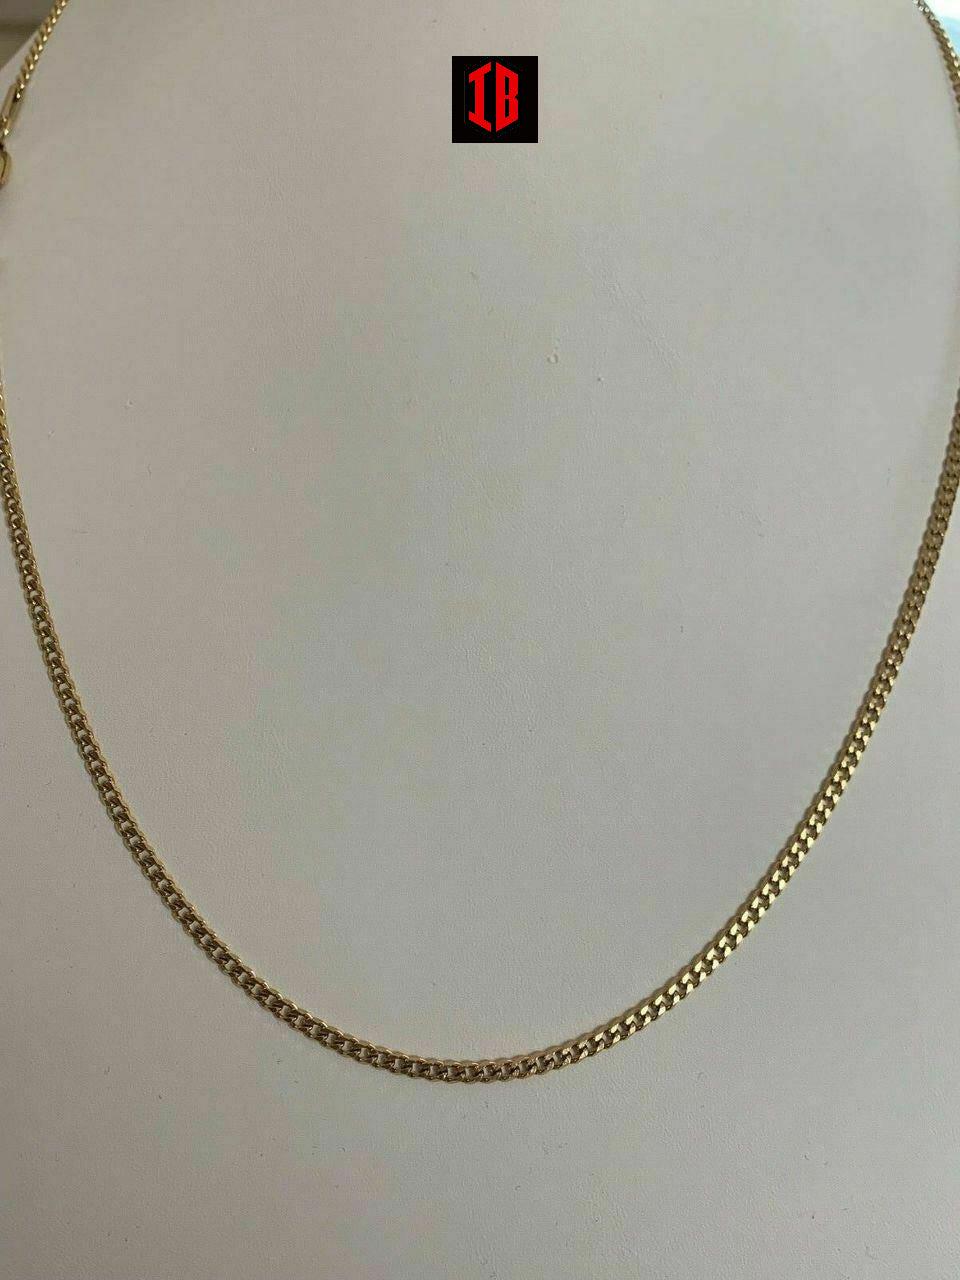 Men's Gold Miami Cuban Link Chain 3mm 14k Gold Over Stainless Steel 18-30" Long